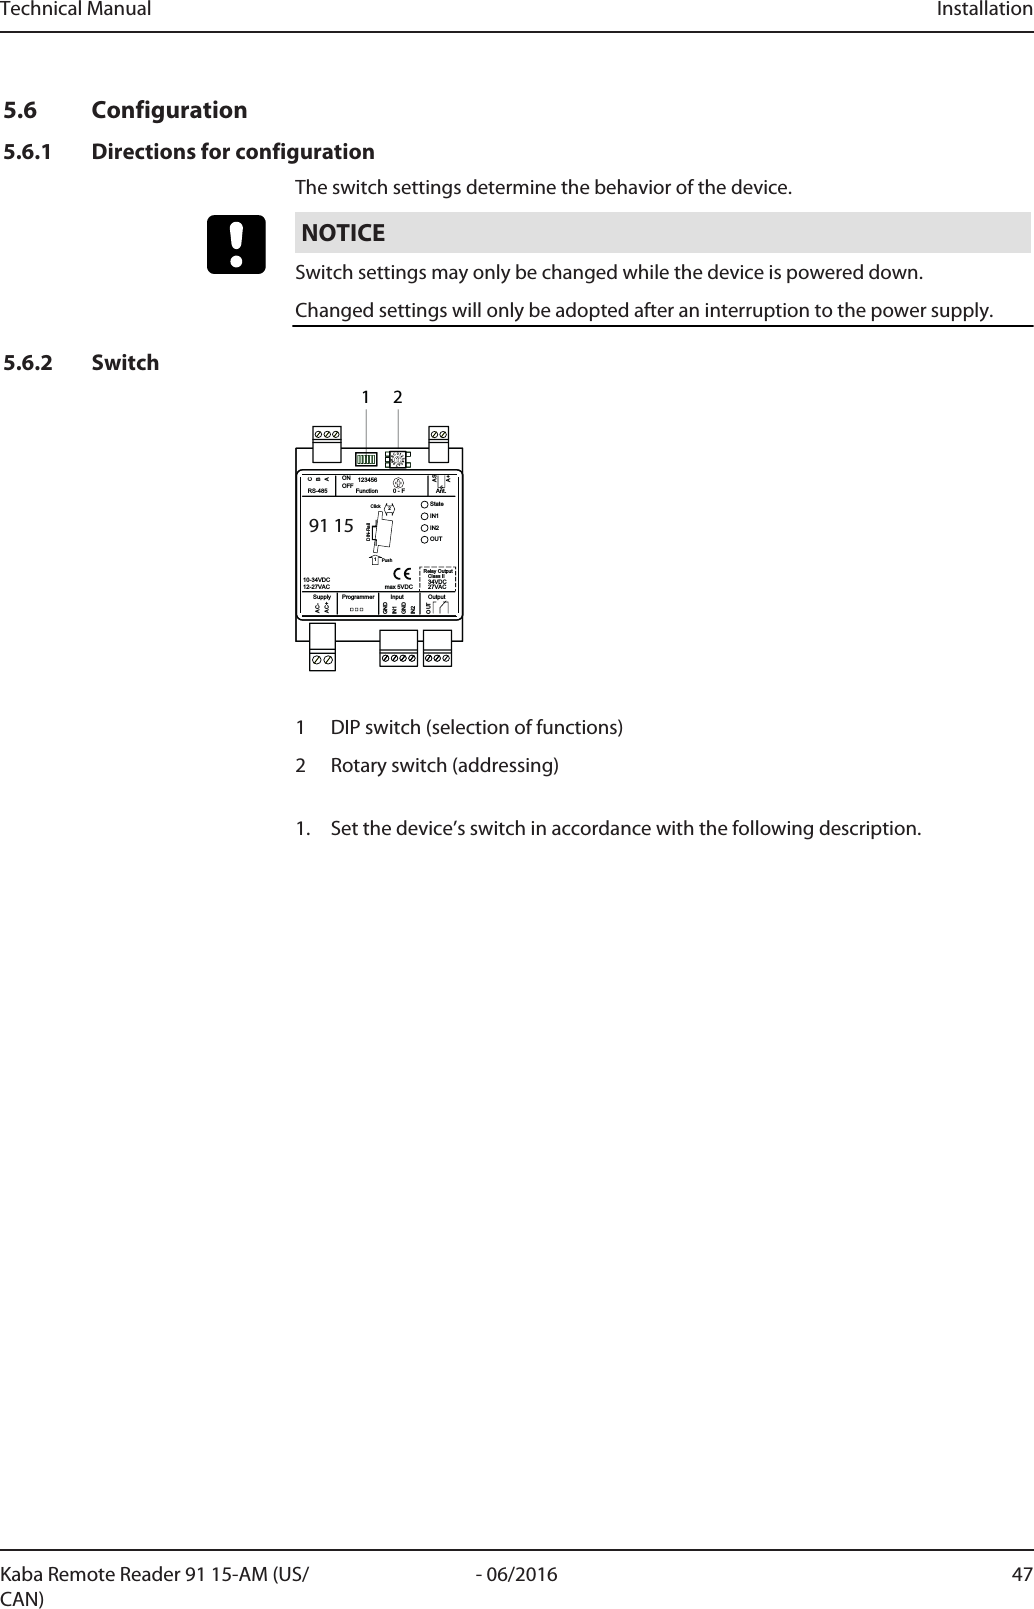 Technical Manual Installation47- 06/2016Kaba Remote Reader 91 15-AM (US/CAN)5.6 Configuration5.6.1 Directions for configurationThe switch settings determine the behavior of the device.NOTICESwitch settings may only be changed while the device is powered down.Changed settings will only be adopted after an interruption to the power supply.5.6.2 Switch0123456789ABC91 15StateIN1IN2OUTGNDAC-AC+BACGNDIN1IN221PushClickDIN-RailASA+OUTOutputAnt.Function 0 - F123456ONOFFRS-485InputProgrammerSupply10-34VDC12-27VAC 34VDCClass IIRelay Output27VACmax 5VDC1 21 DIP switch (selection of functions)2 Rotary switch (addressing)1. Set the device’s switch in accordance with the following description.